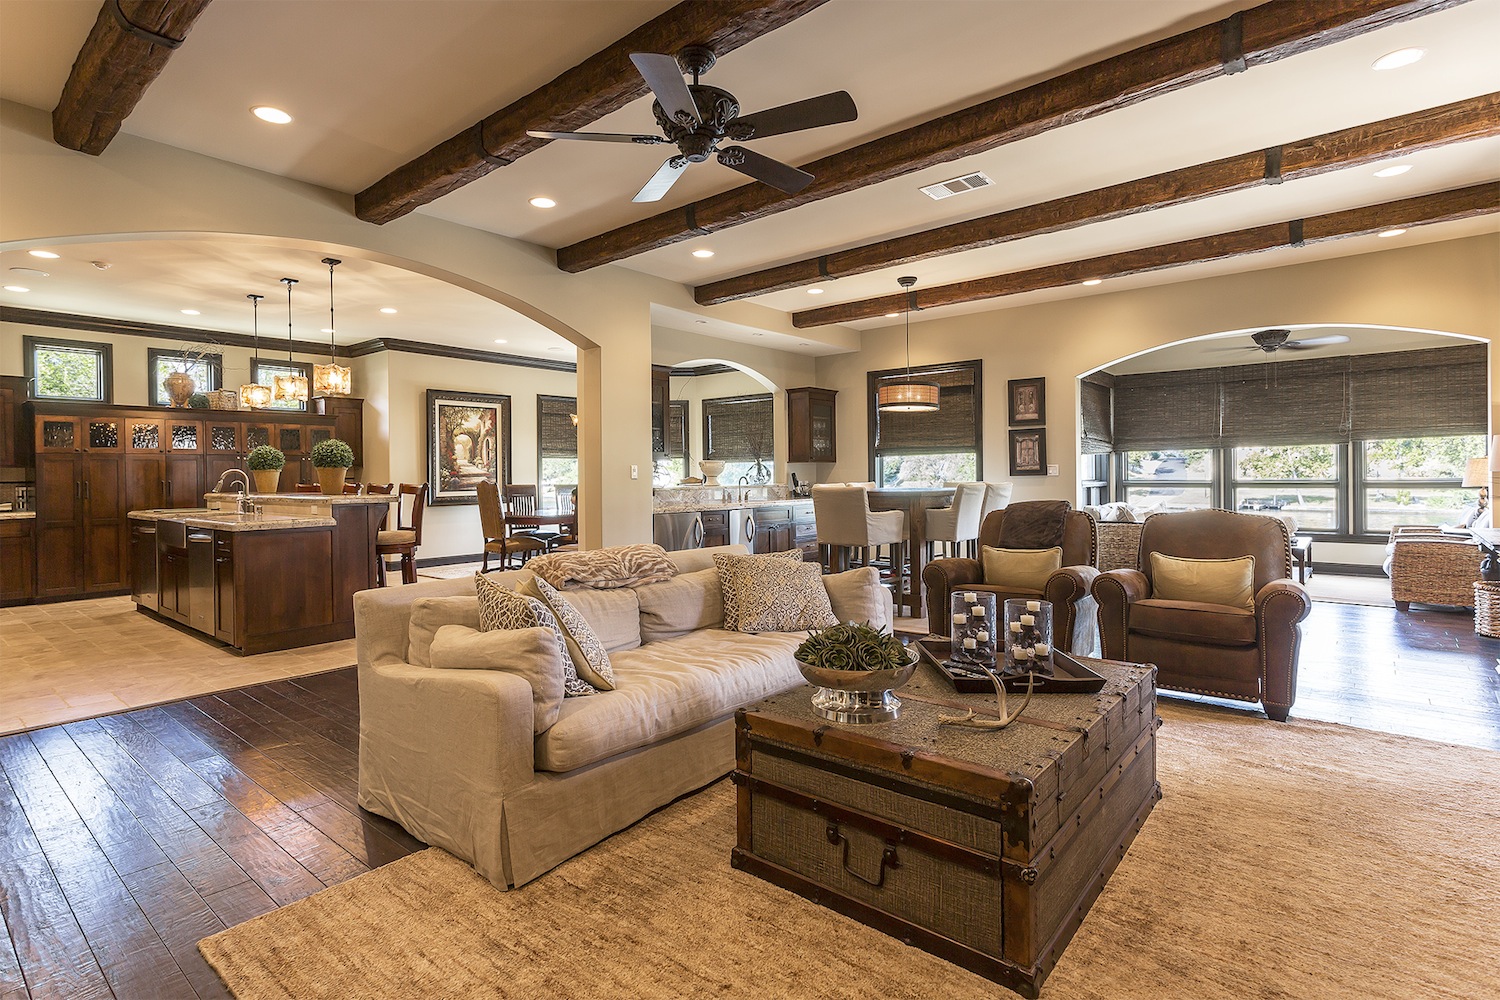 Dark faux wood beams with straps span the length of a large open-concept kitchen and great room.